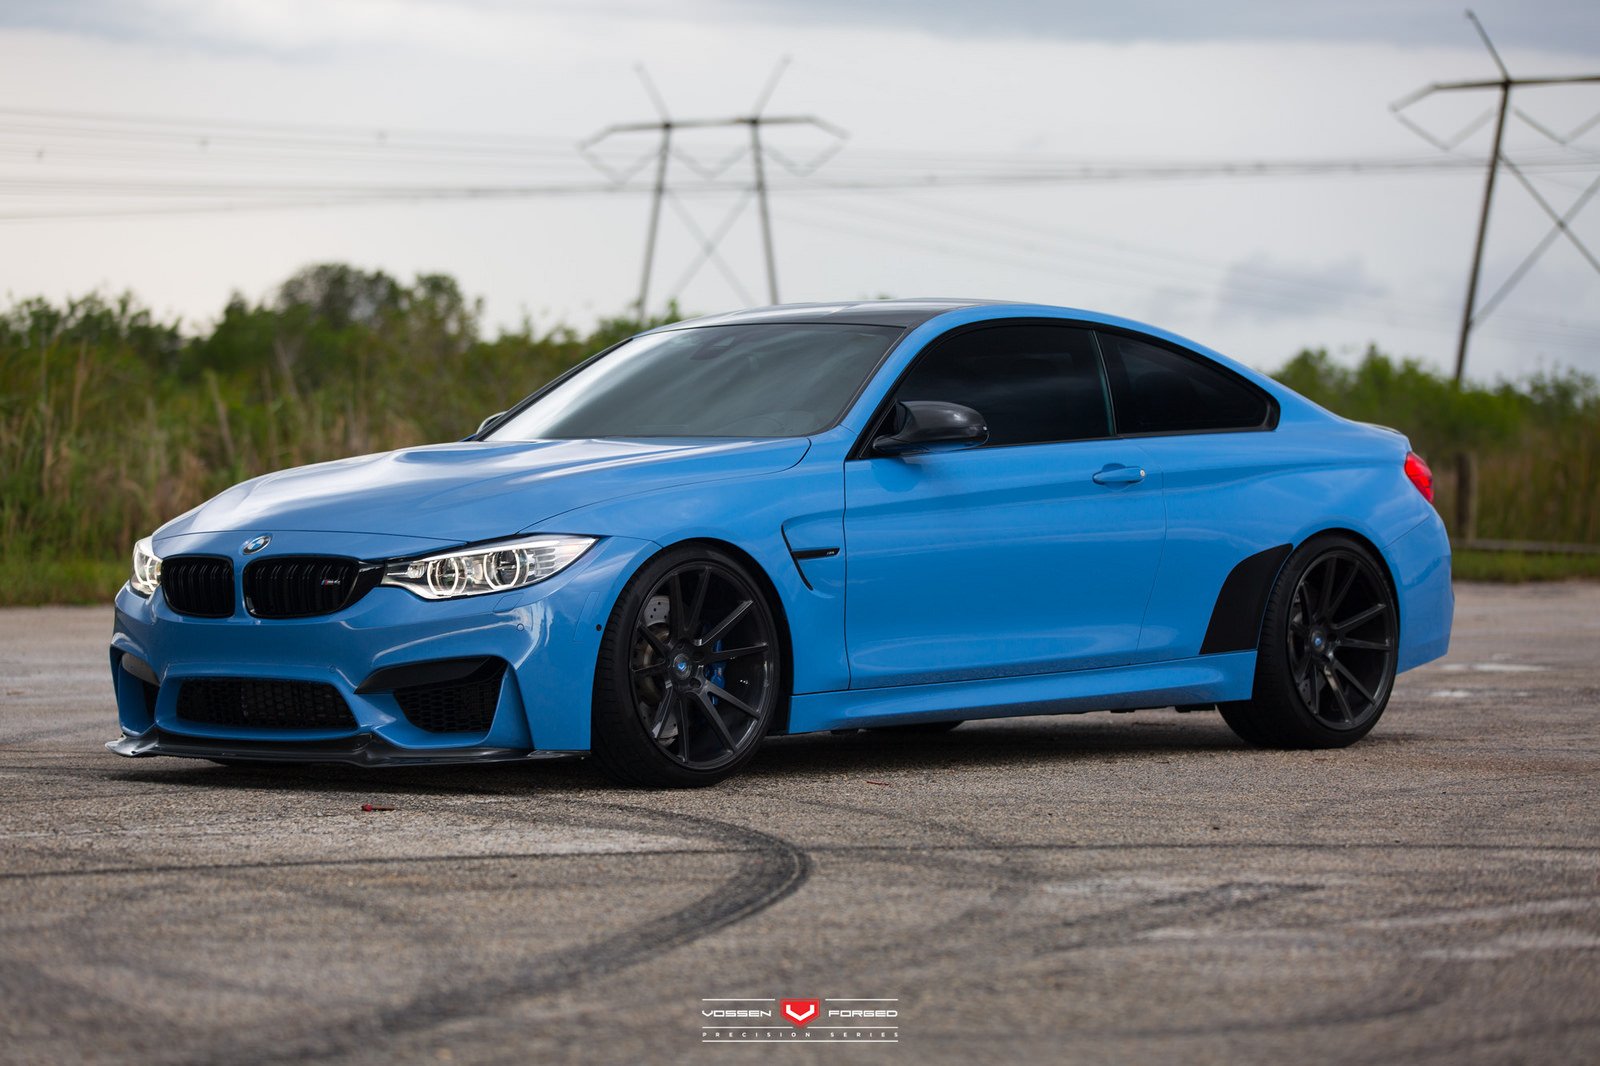 Bmw M4 Coupe Cars Blue Vossen Wheels Wallpapers Hd Desktop And Mobile Backgrounds